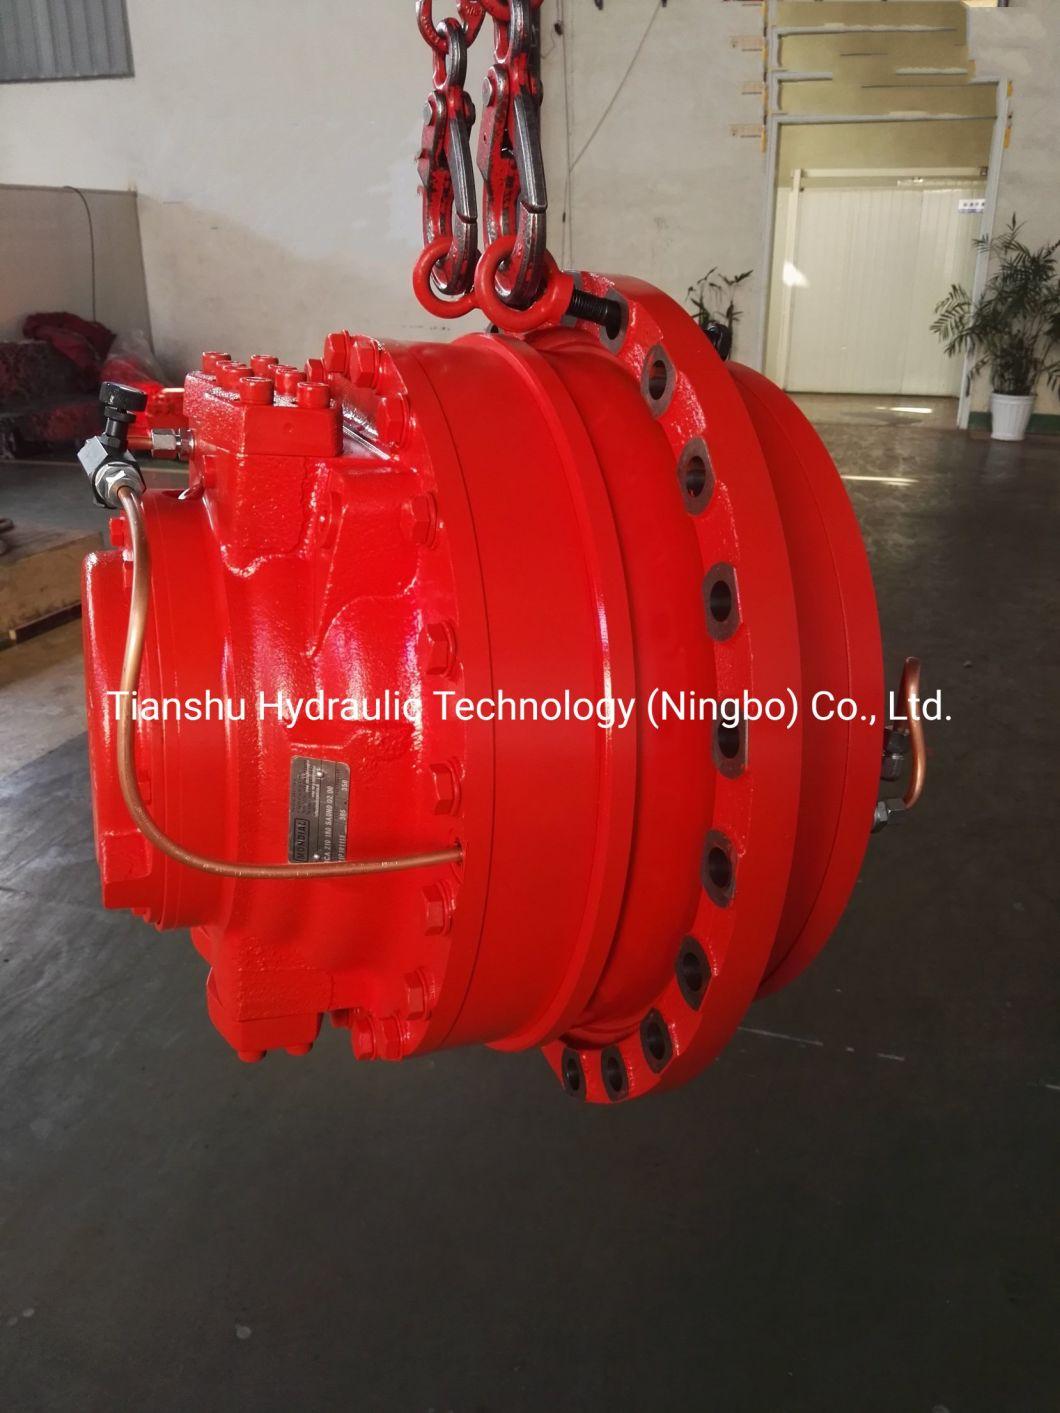 Rexroth Hagglunds Hydraulic Oil Motor Ca70 Ca140 Ca210 with Brake for Winch and Anchor Motor.